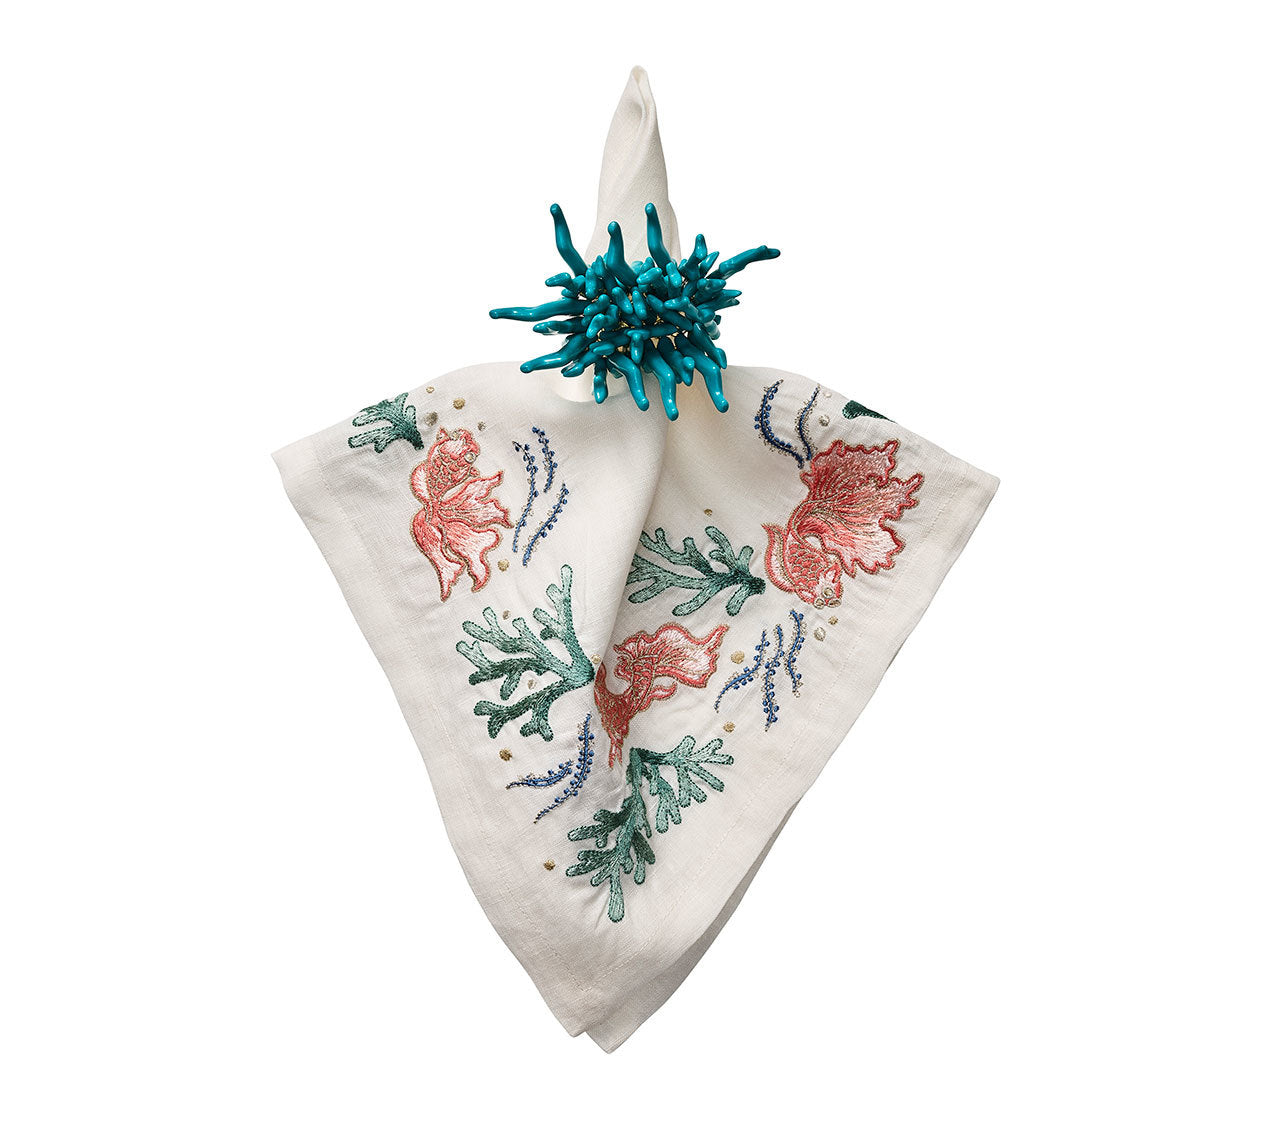 Amalfi Napkin Rings in Turquoise - Pioneer Linens